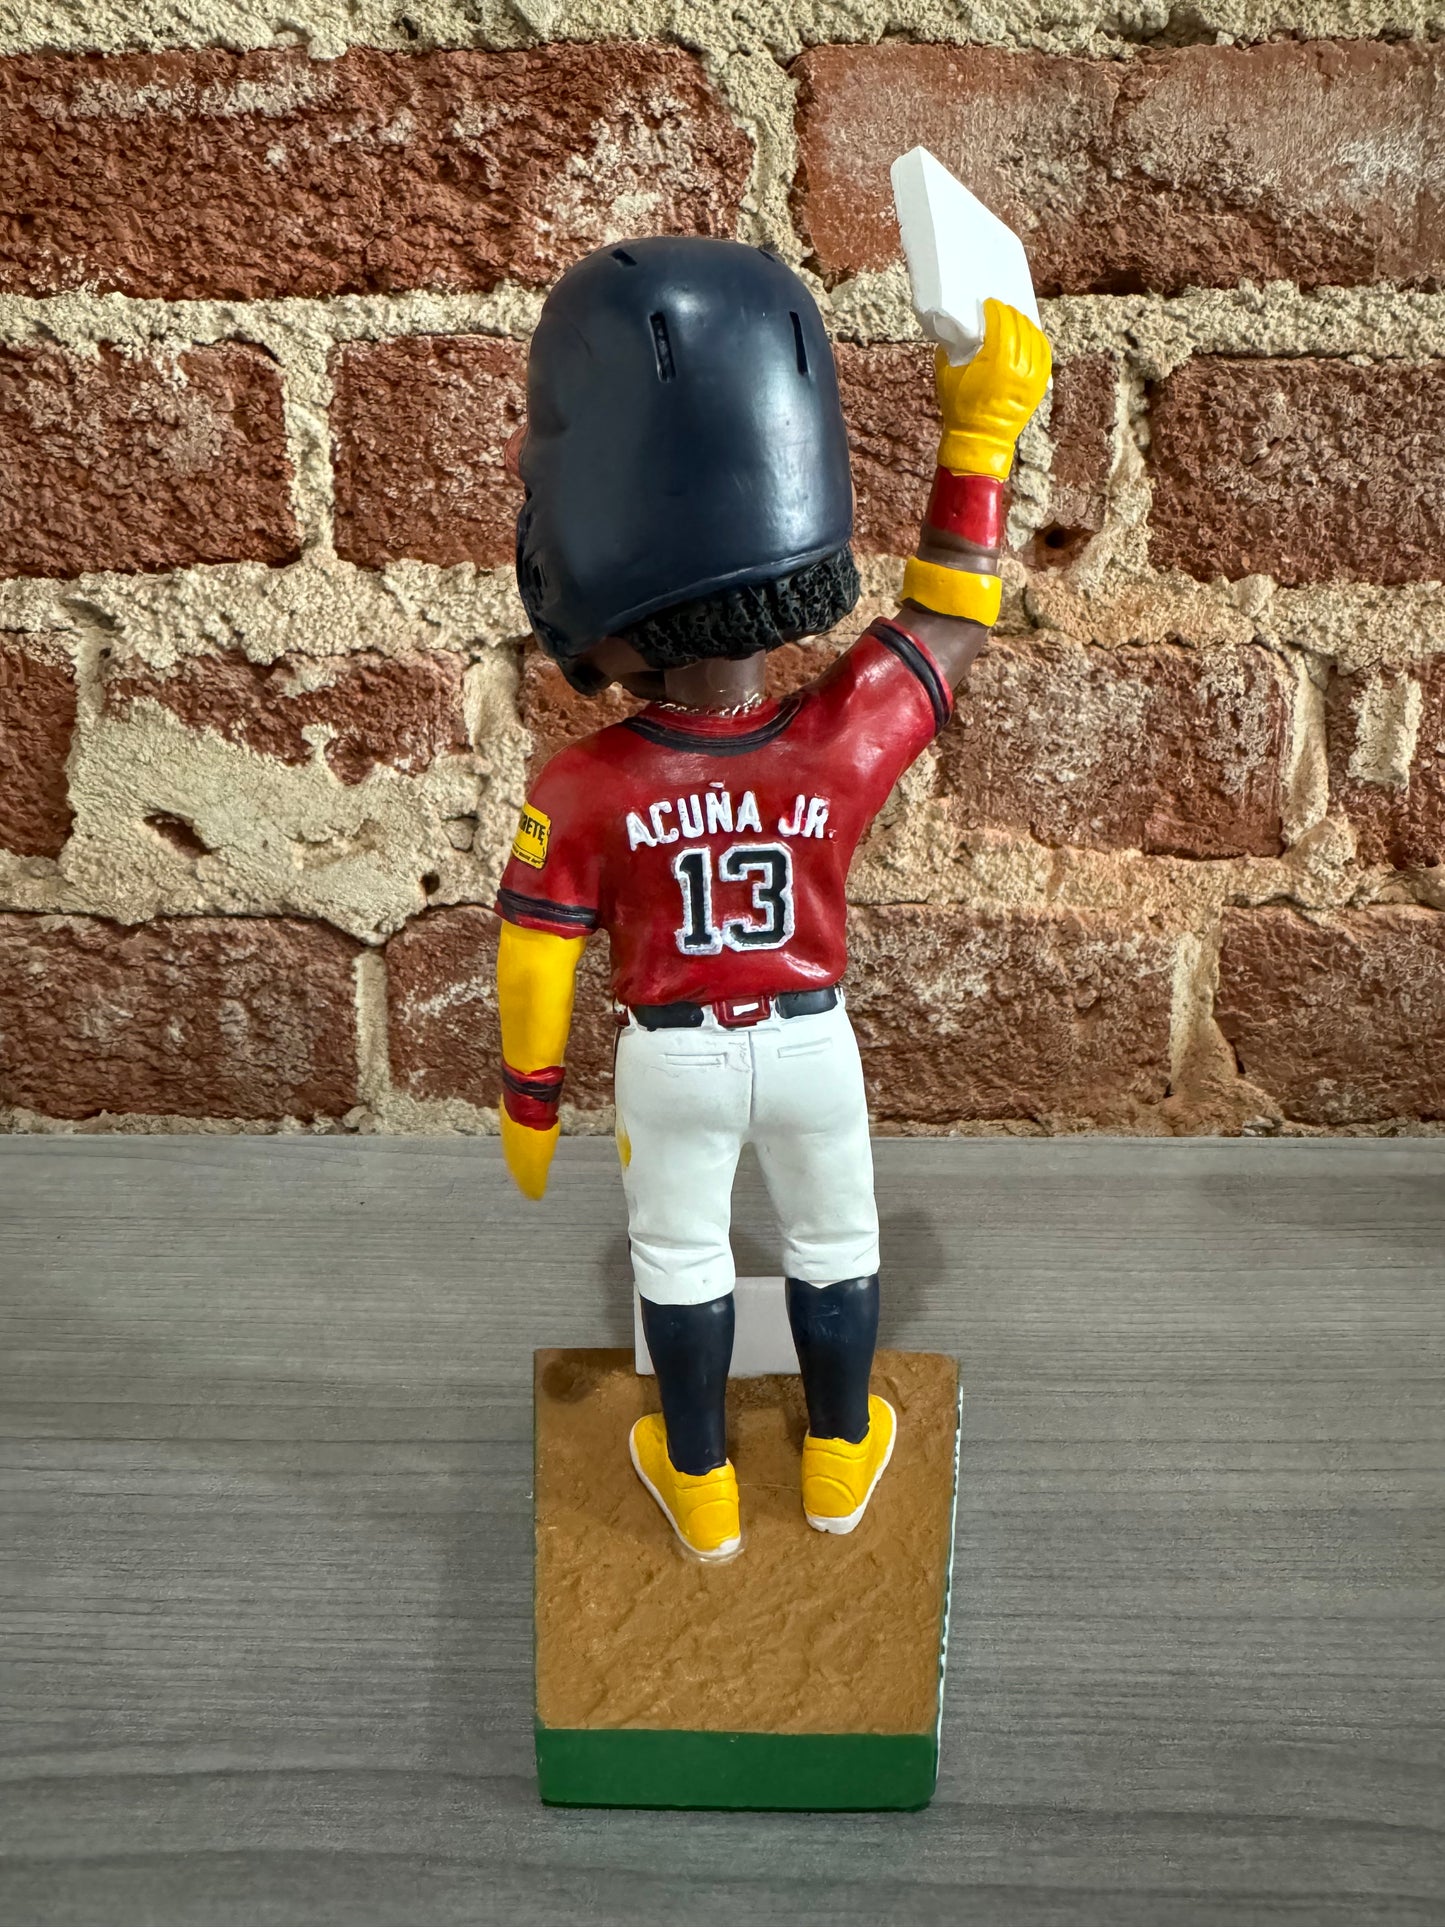 Ronald Acuña Jr. 73 Stolen Bases Record Bobblehead Giveaway 4/24/24